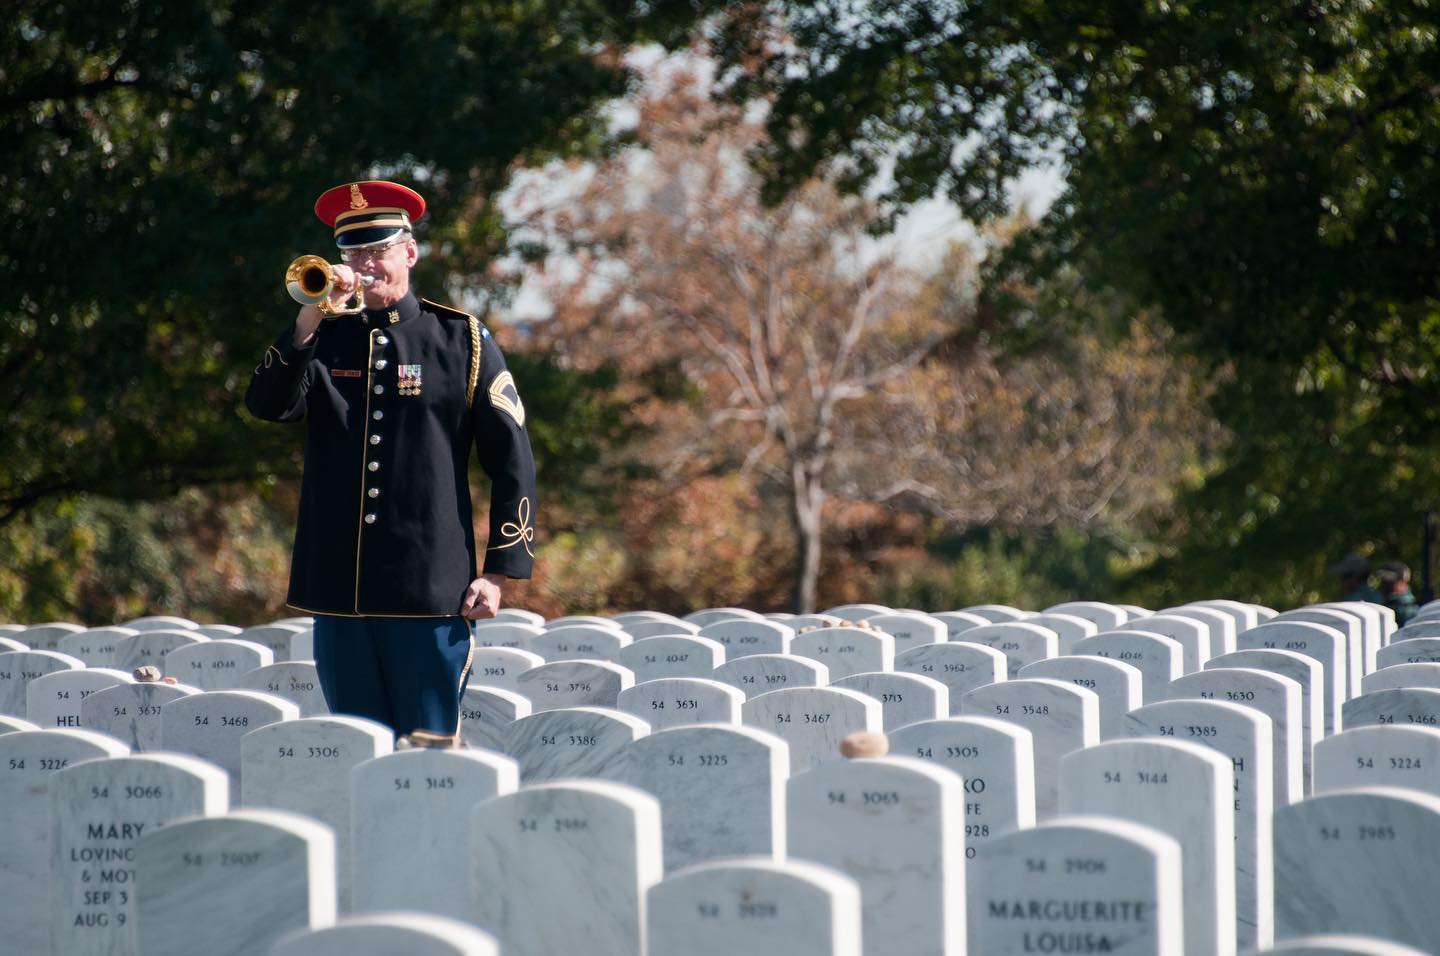 A bugler from the U.S. Army Band, "Pershing's Own", plays Taps during military funeral honors for a U.S. Air Force veteran in Arlington National Cemetery, Arlington, Virginia. ⠀
⠀
Of all the military bugle calls, none is so easily recognized or more apt to render emotion than the call Taps. The melody is both eloquent and haunting.⠀
⠀
Per ANC historians, "Taps has been used by the U.S. armed forces since the civil war — at the end of the day, during flag ceremonies and at military funerals. Whenever a service member is buried with military honors anywhere in the United States, the ceremony concludes with the three-rifle volley and the sounding of Taps on a trumpet or bugle. ⠀
⠀
Melancholy yet serene, the call lingers in memory."